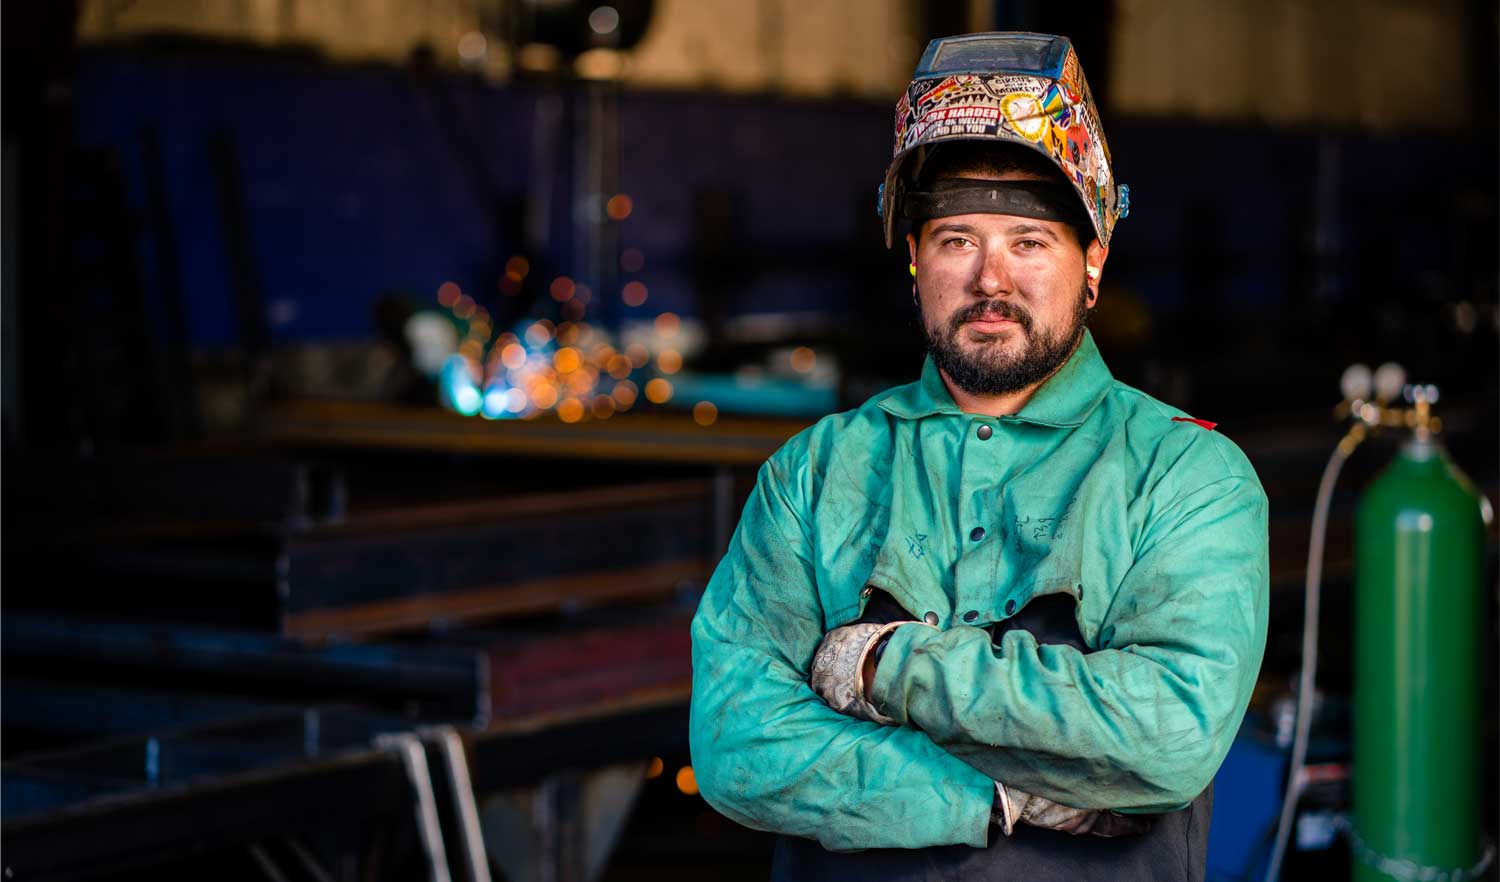 welder with visor up and arms crossed looking at camera